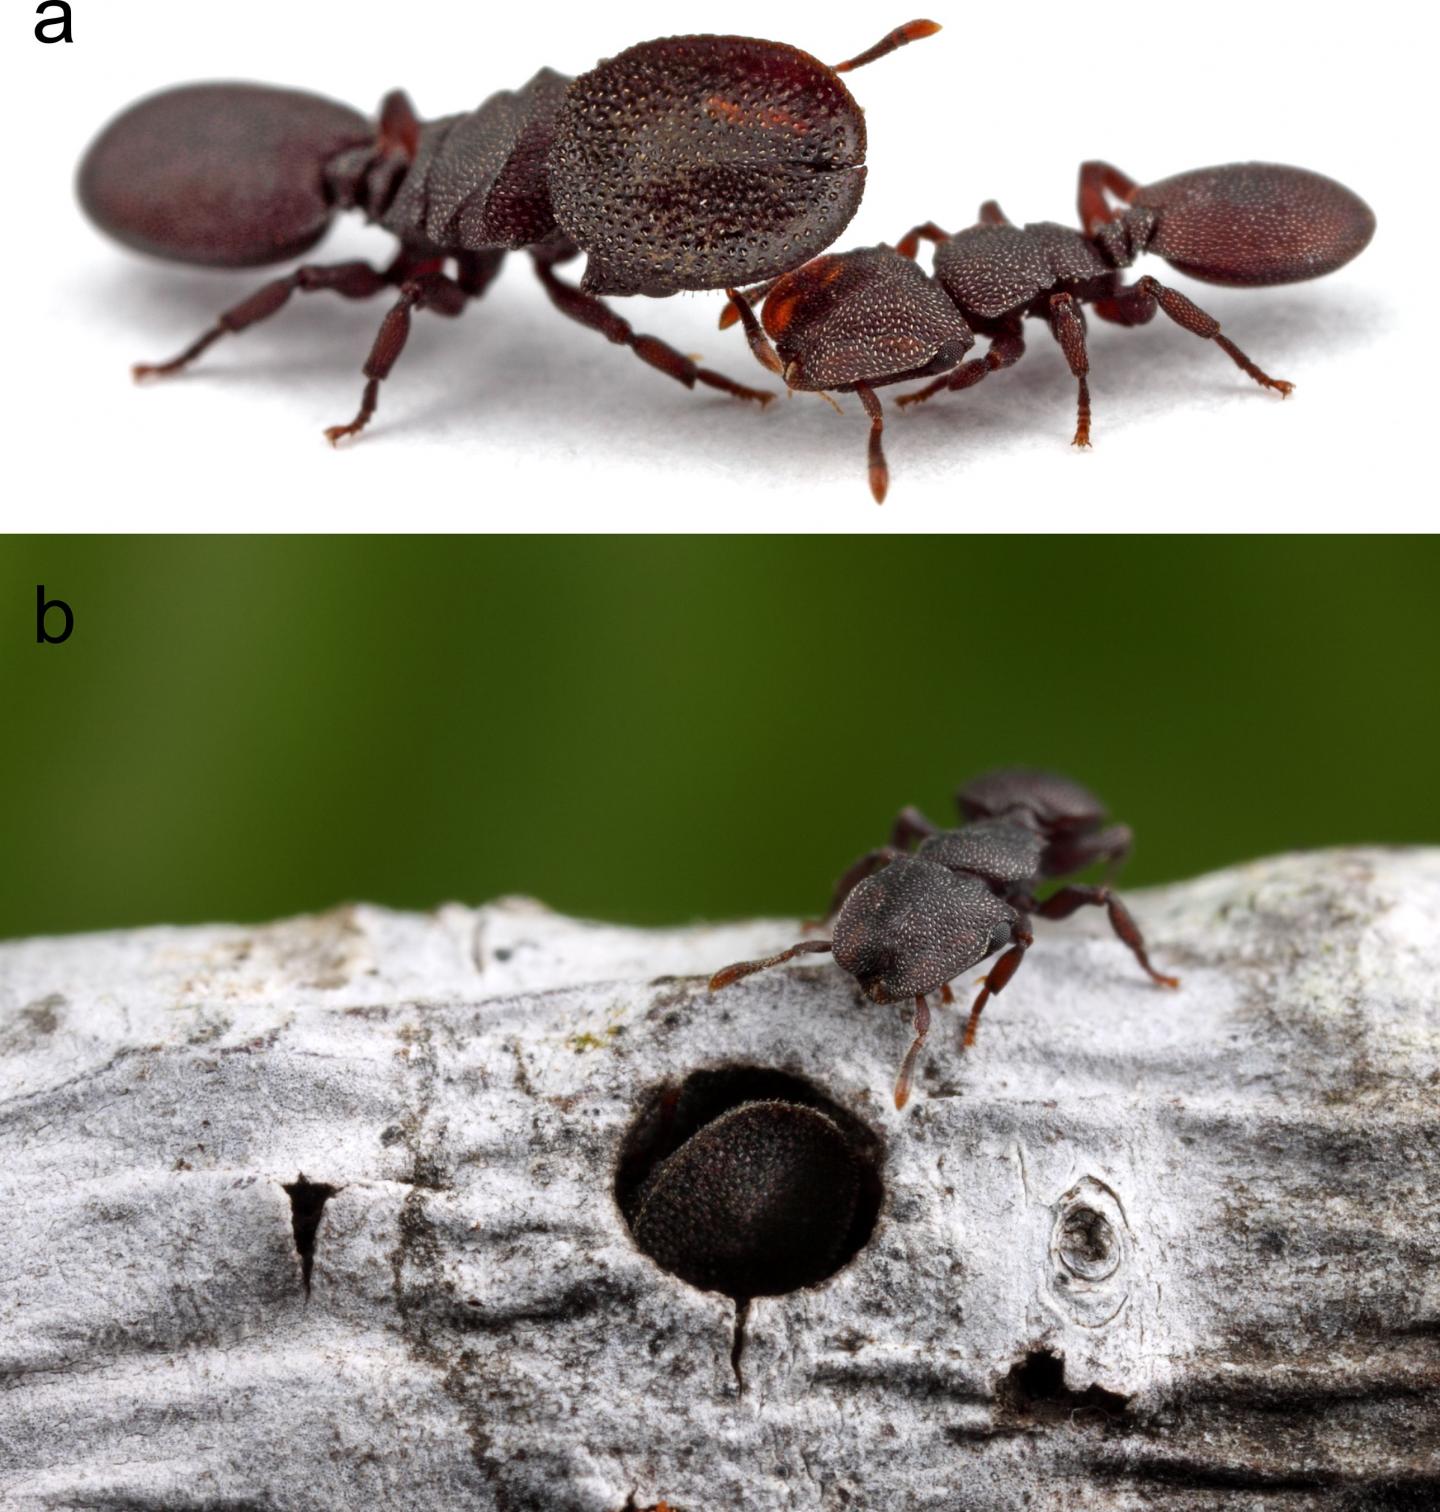 Laborer, Doorkeeper, Future Queen: Neurobiology In Turtle Ants Reflects Division Of Labor